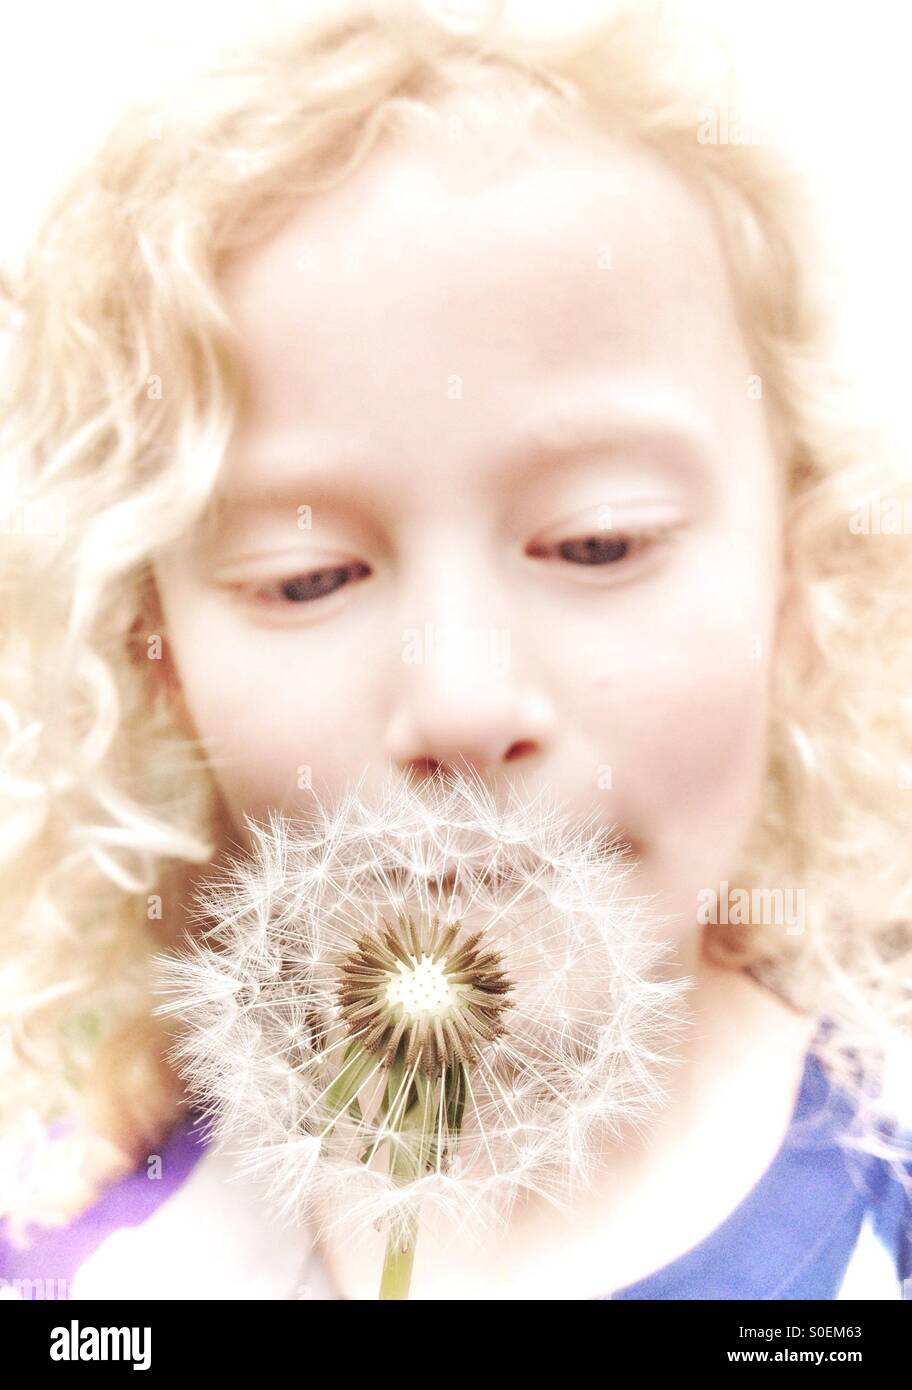 Young girl blowing on dandelion seed head Stock Photo